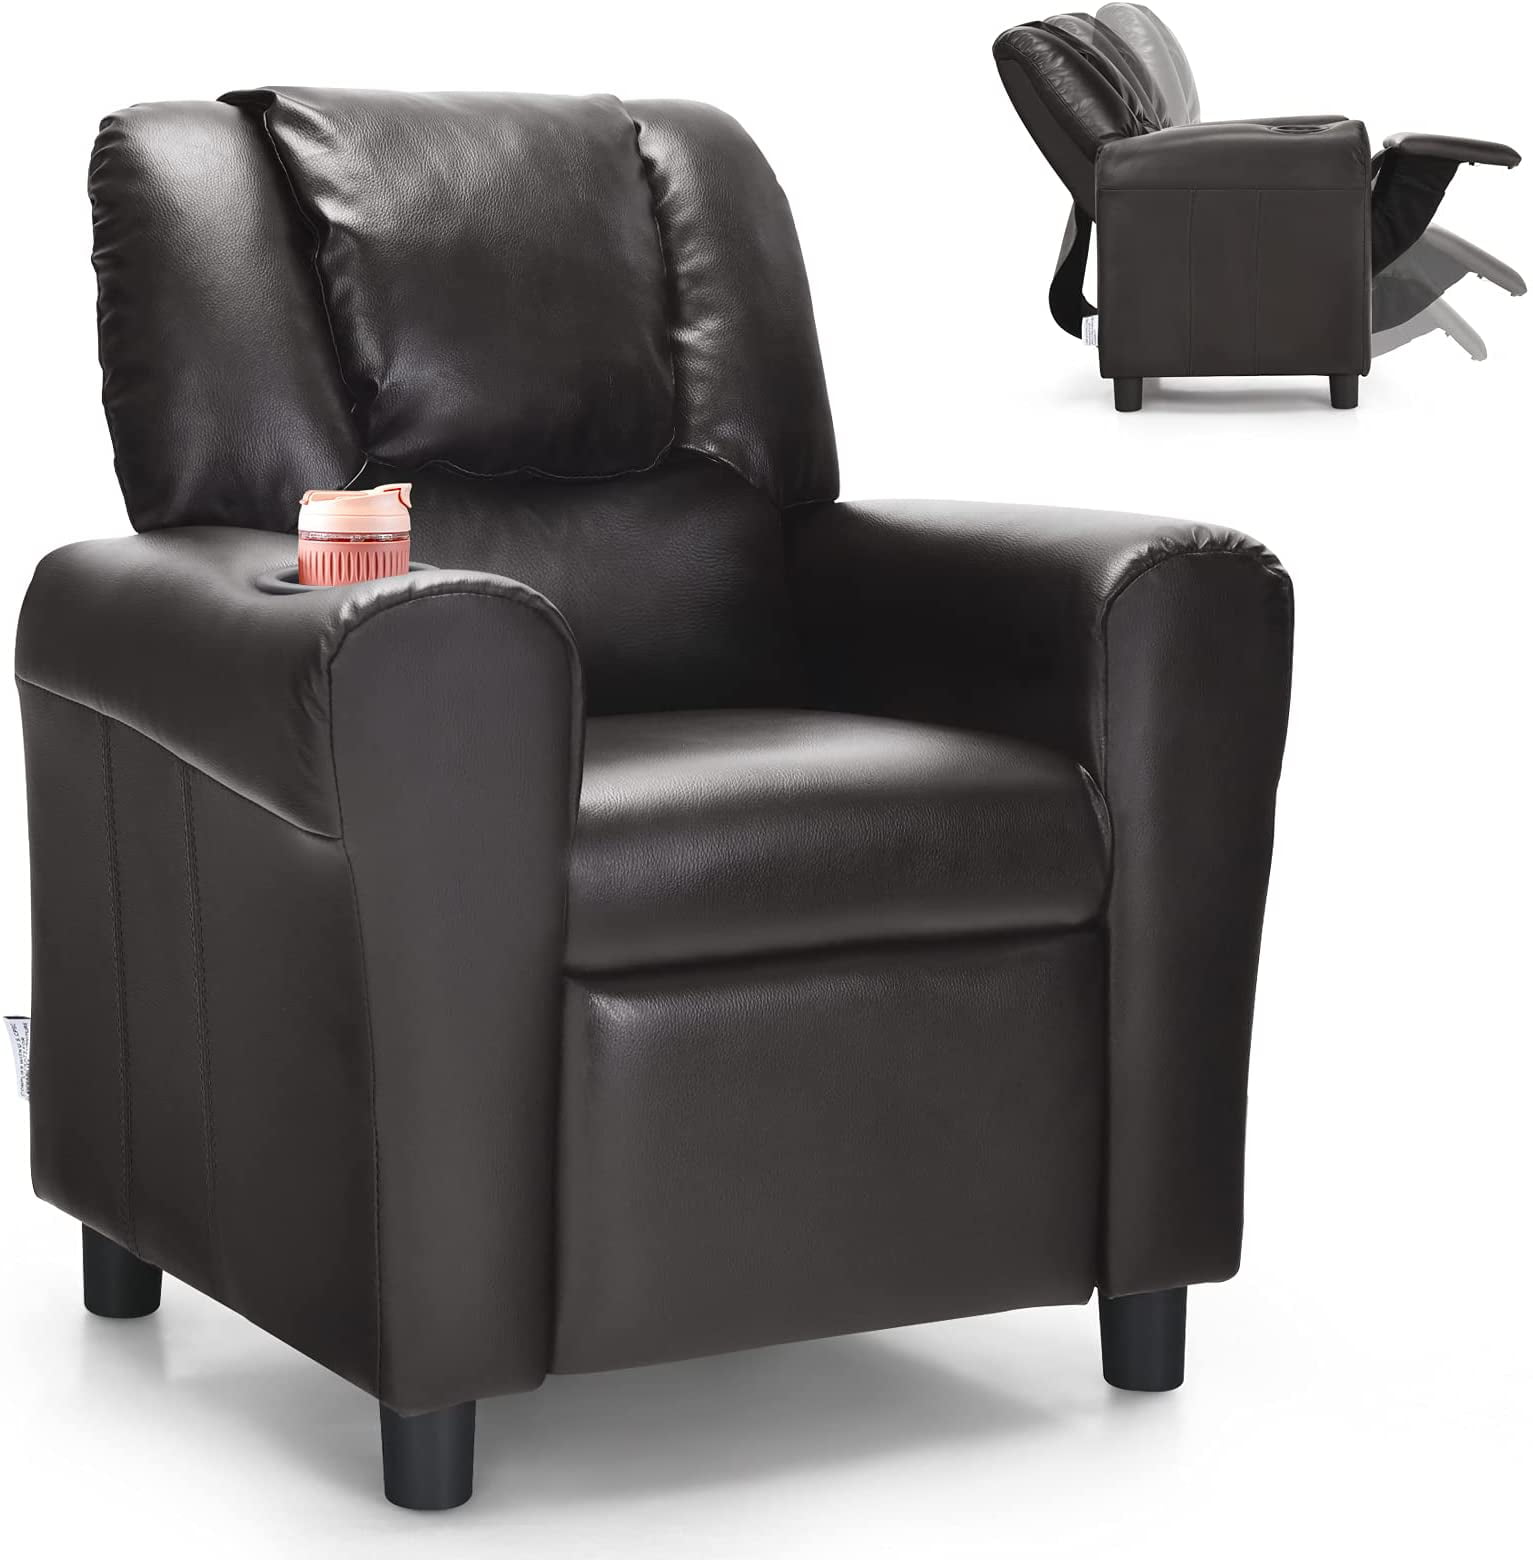 Kids Recliner with Cup Holder Brown Leather Sofa Chair Recliners Chairs for Children 